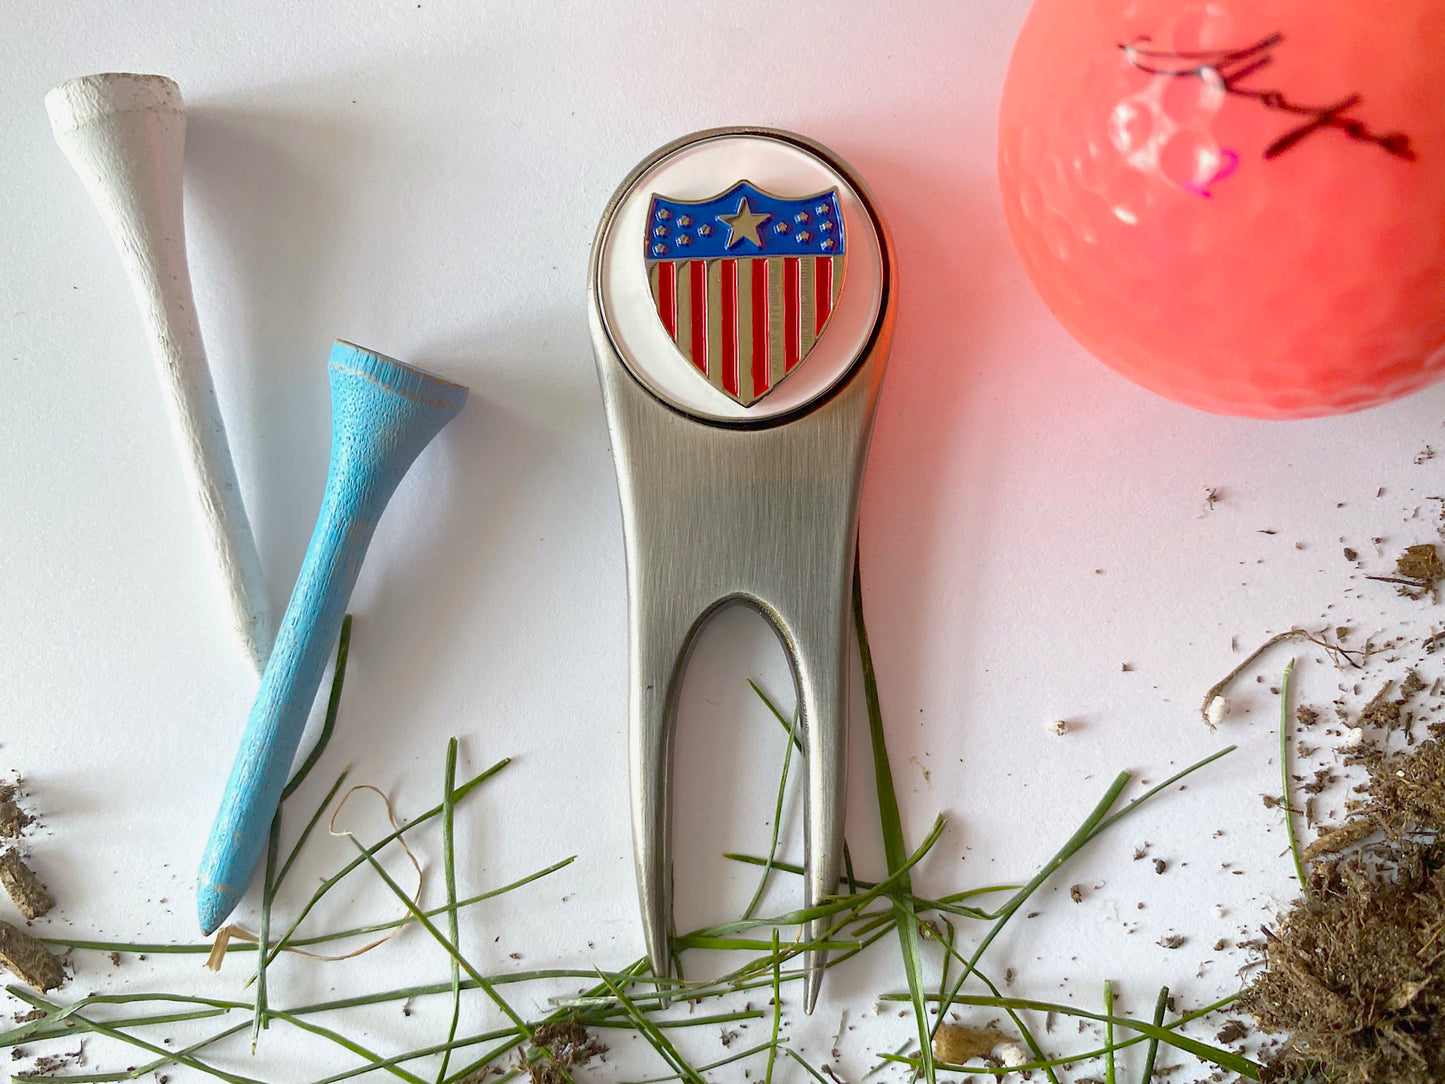 Adjutant General's Corps (AG) Golf Divot Tool and Ball Marker